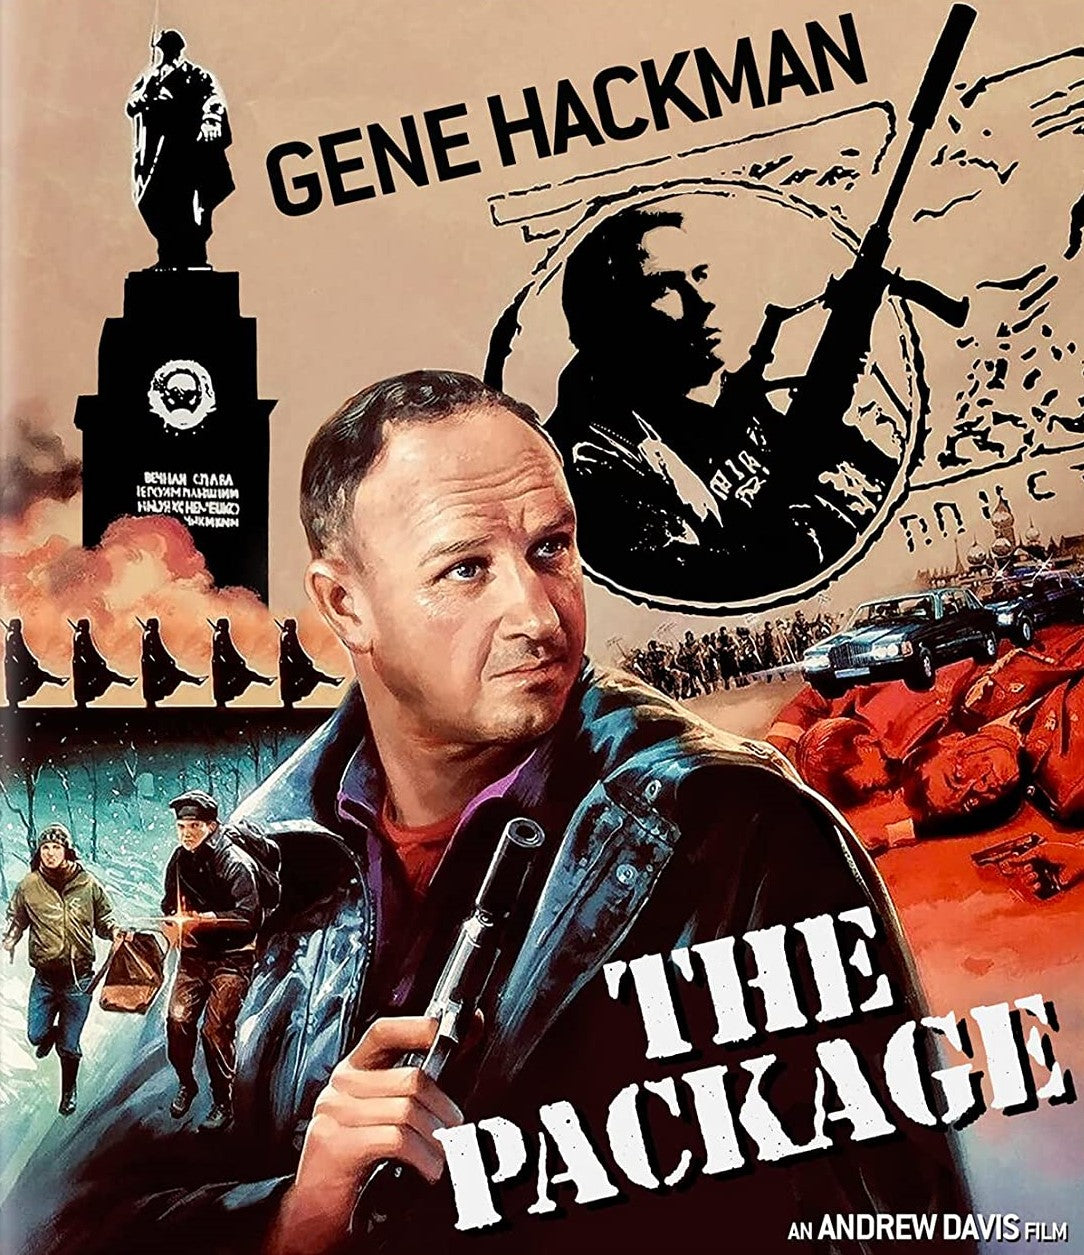 THE PACKAGE BLU-RAY